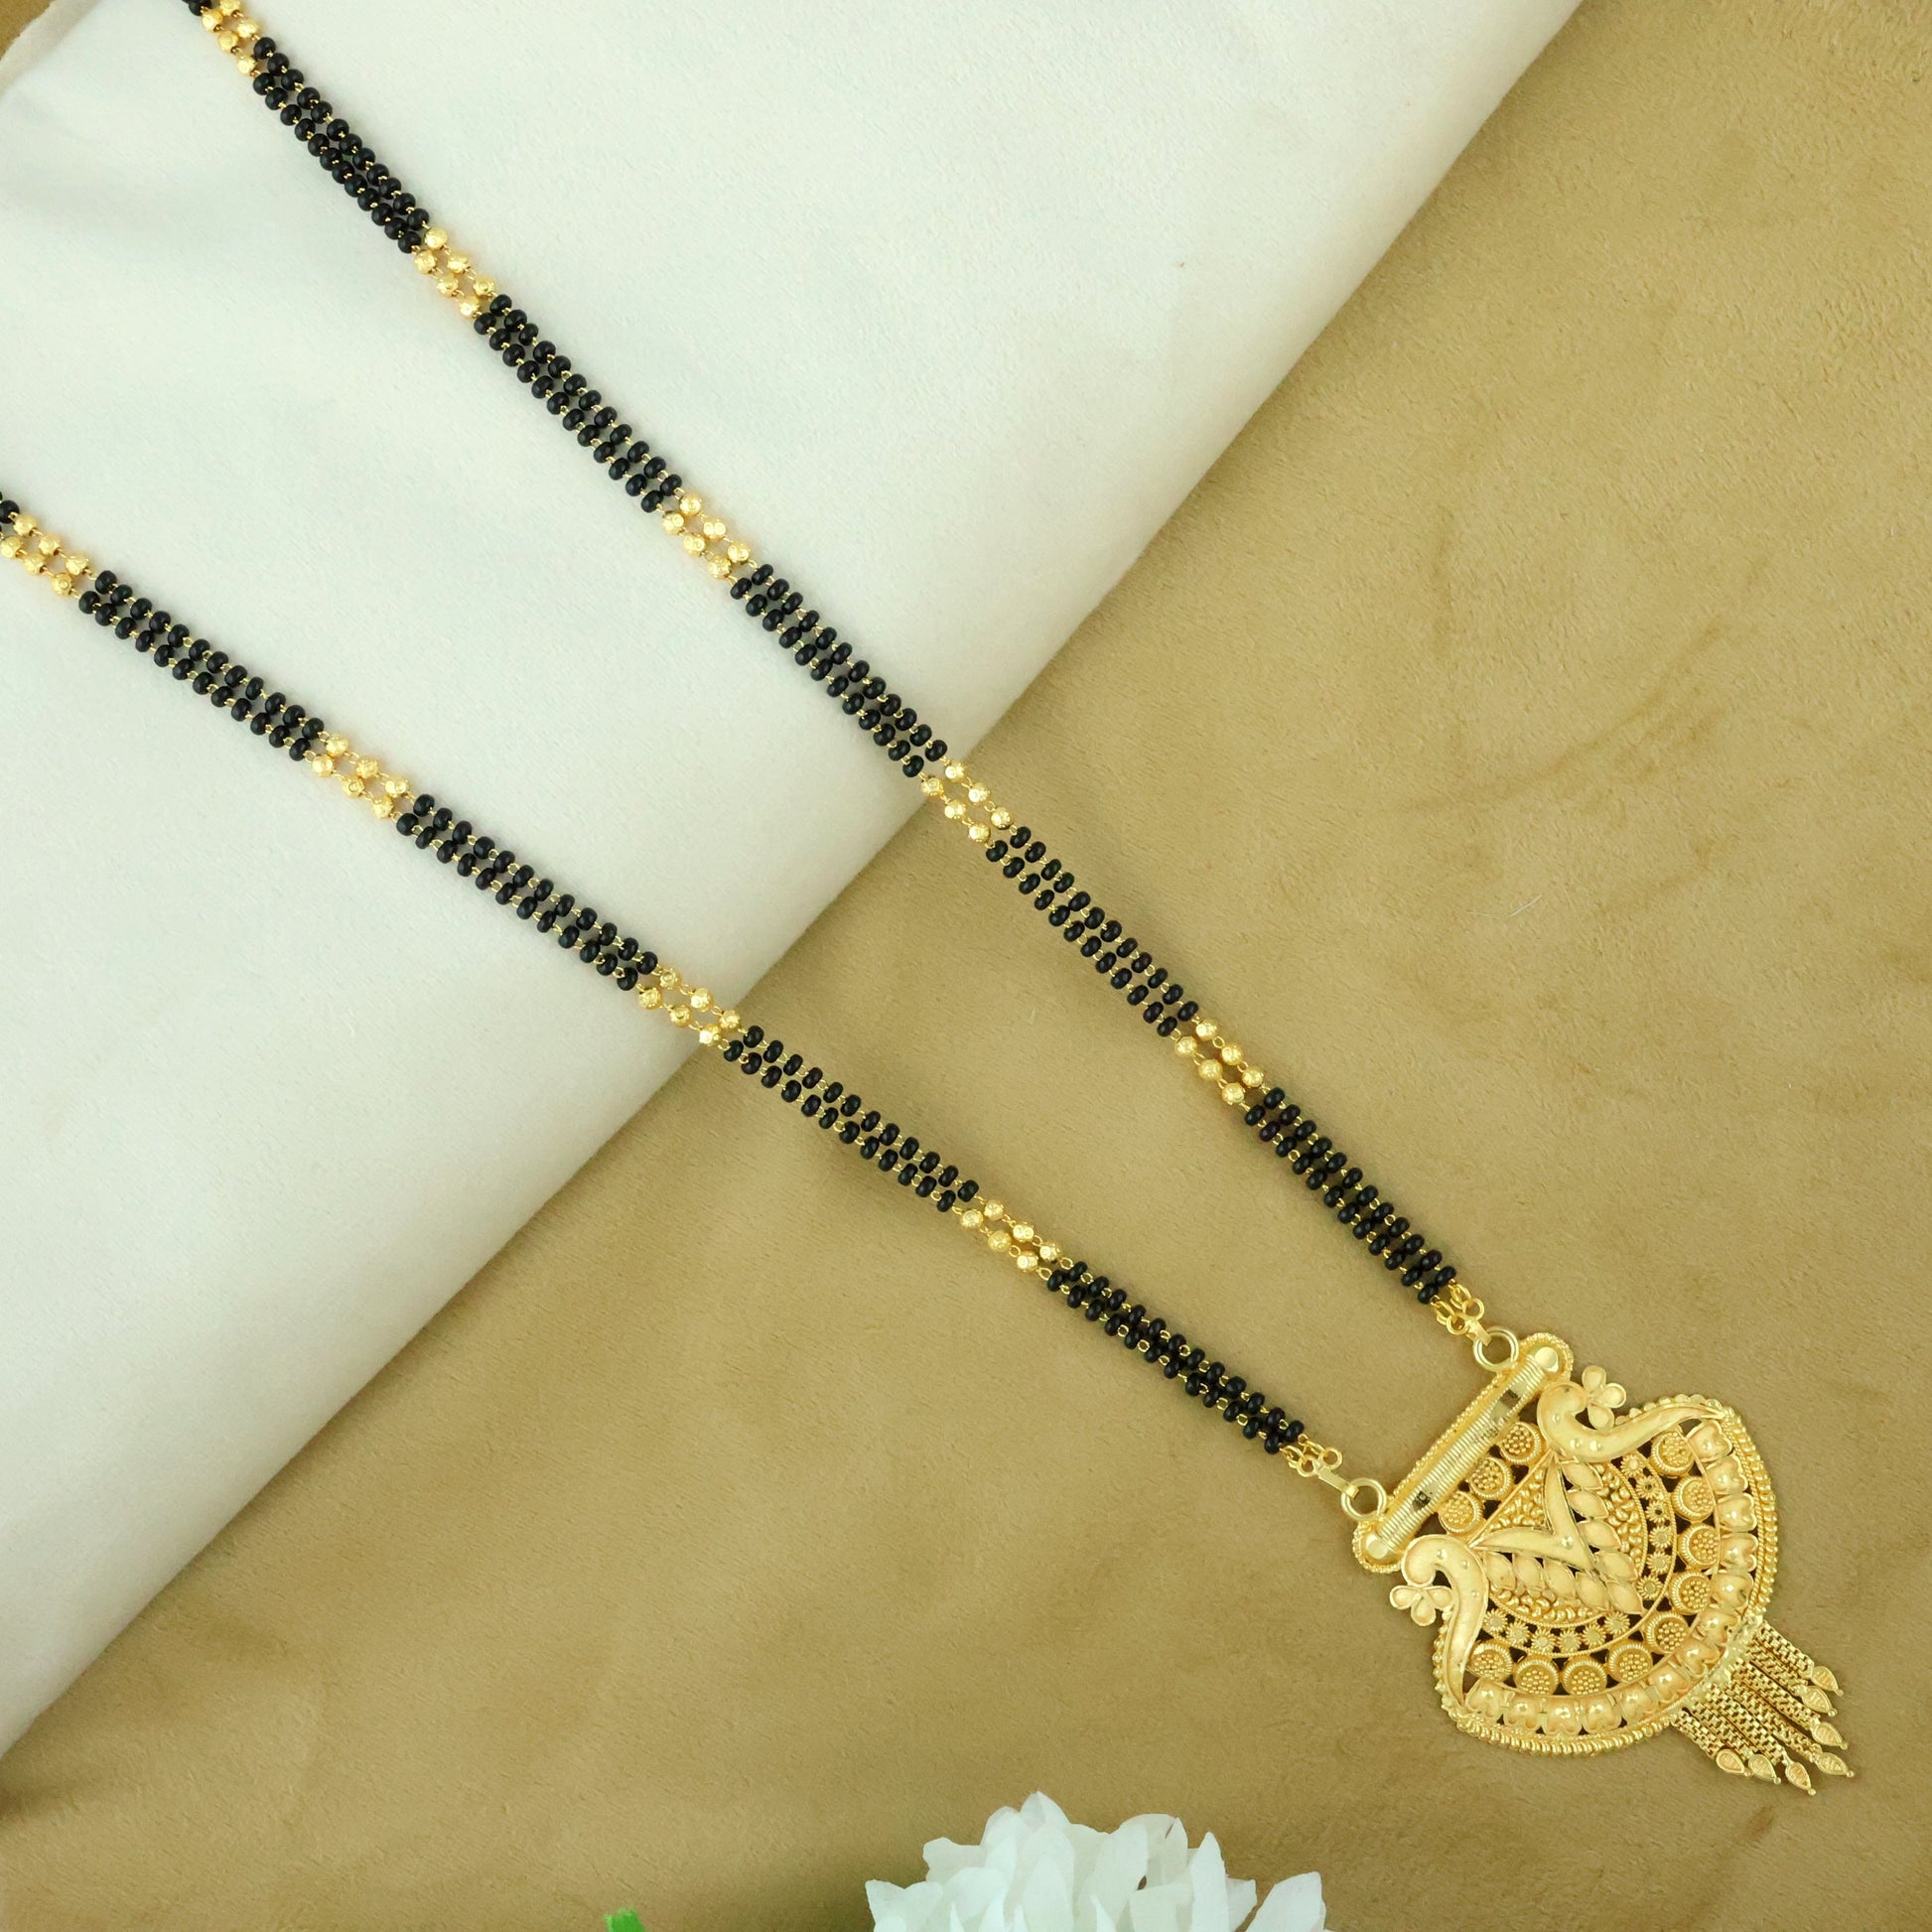 Gold Plated Mangalsutra Long Chain | Buy Mangalsutra online From Mekkna